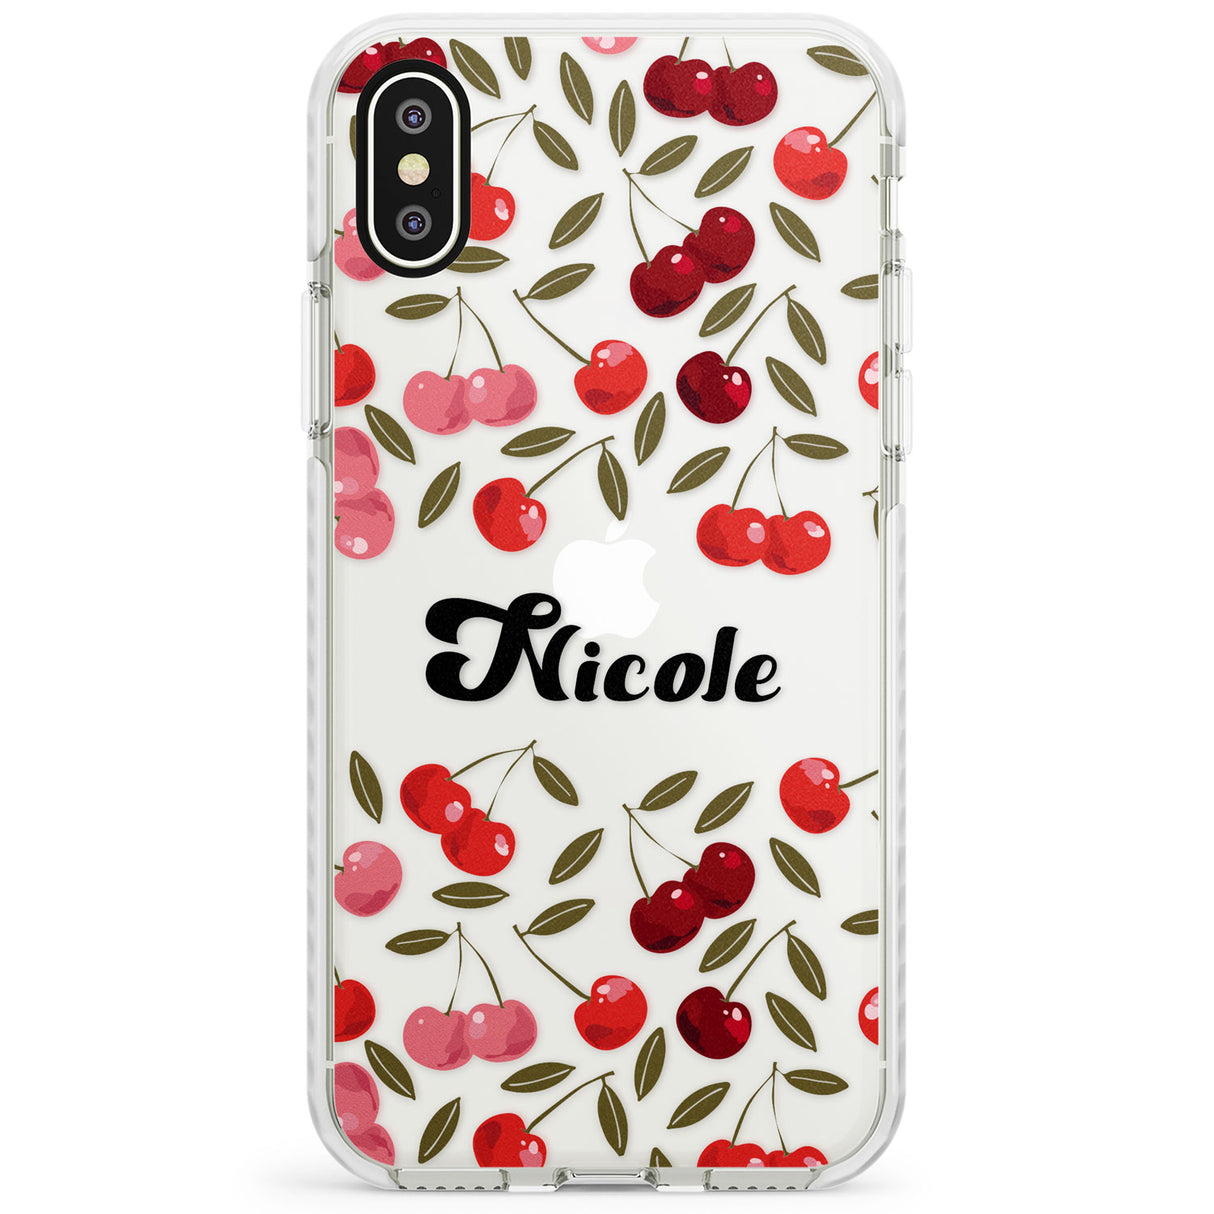 Personalised Cherry Pattern Impact Phone Case for iPhone X XS Max XR